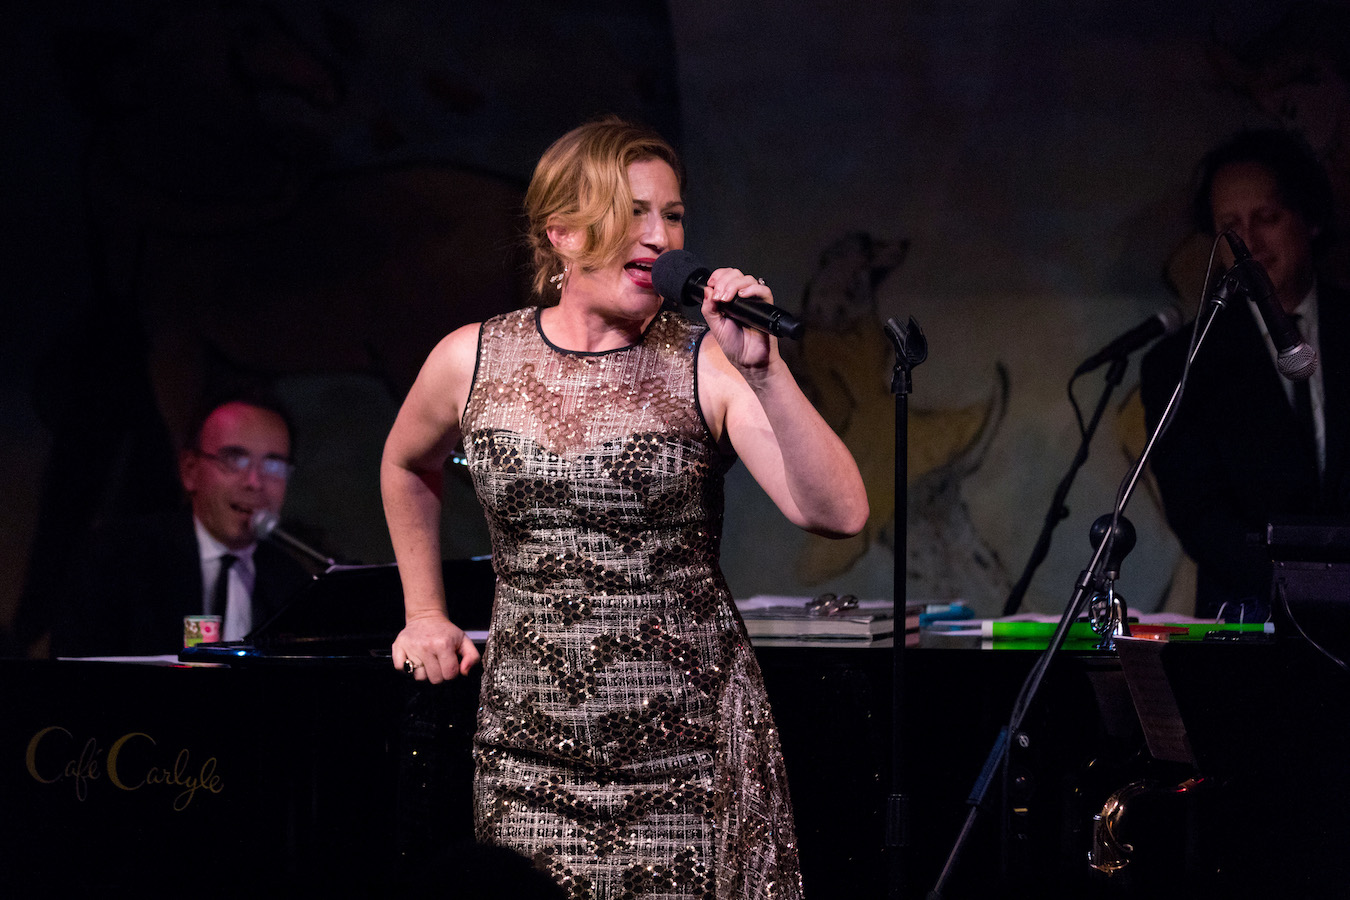 Ana Gasteyer at The Café Carlyle